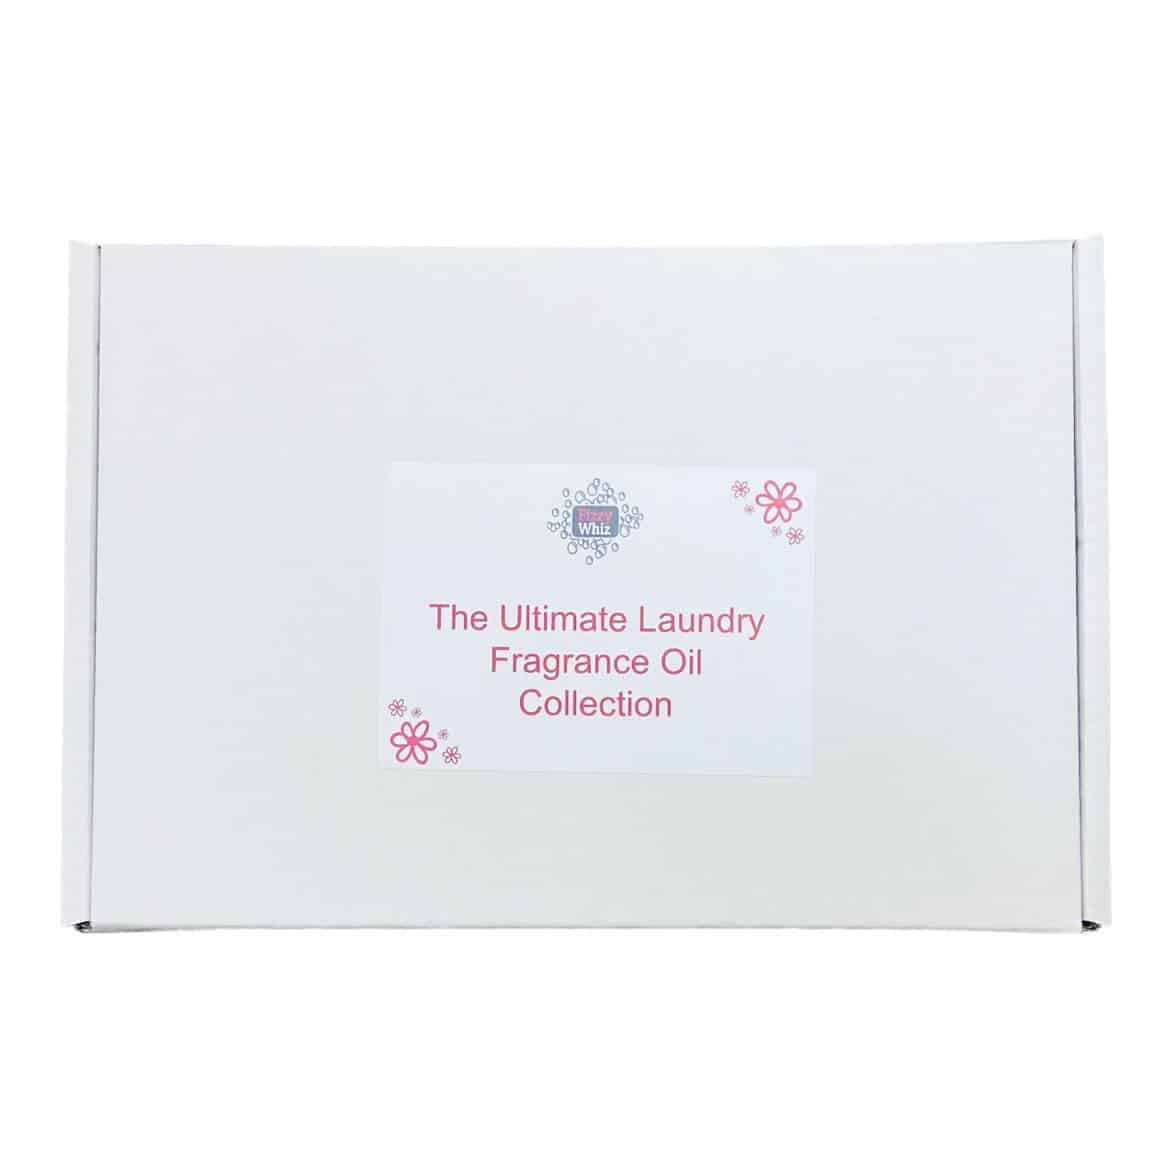 The Ultimate Laundry Fragrance Oil Collection